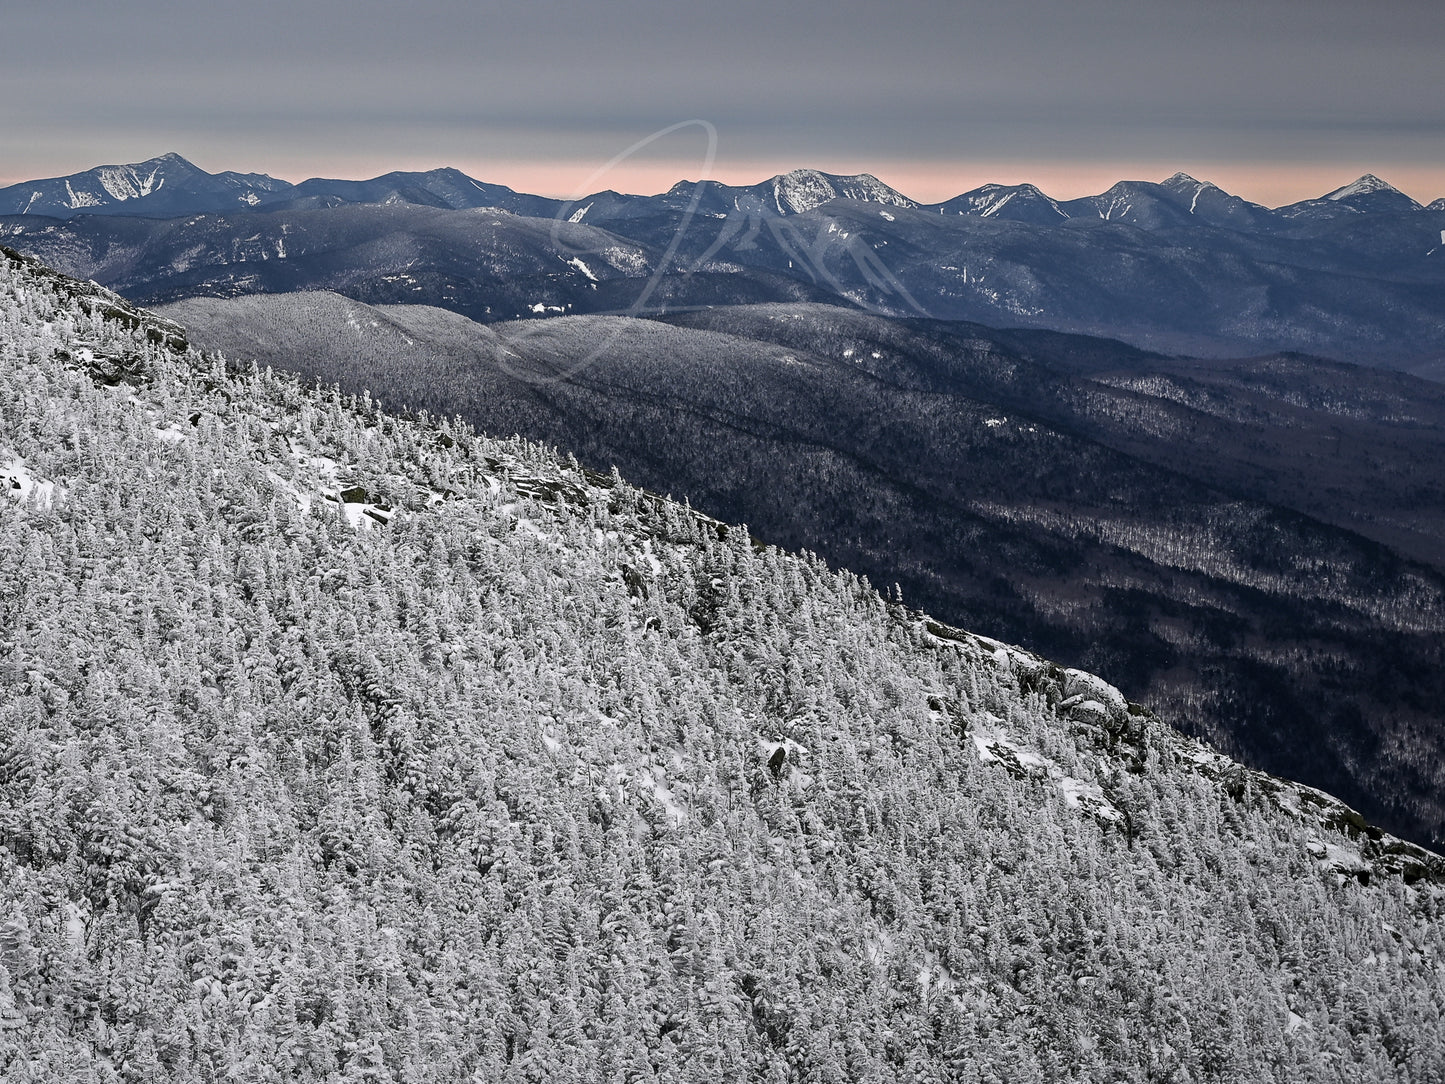 print of The Great Range from Whiteface